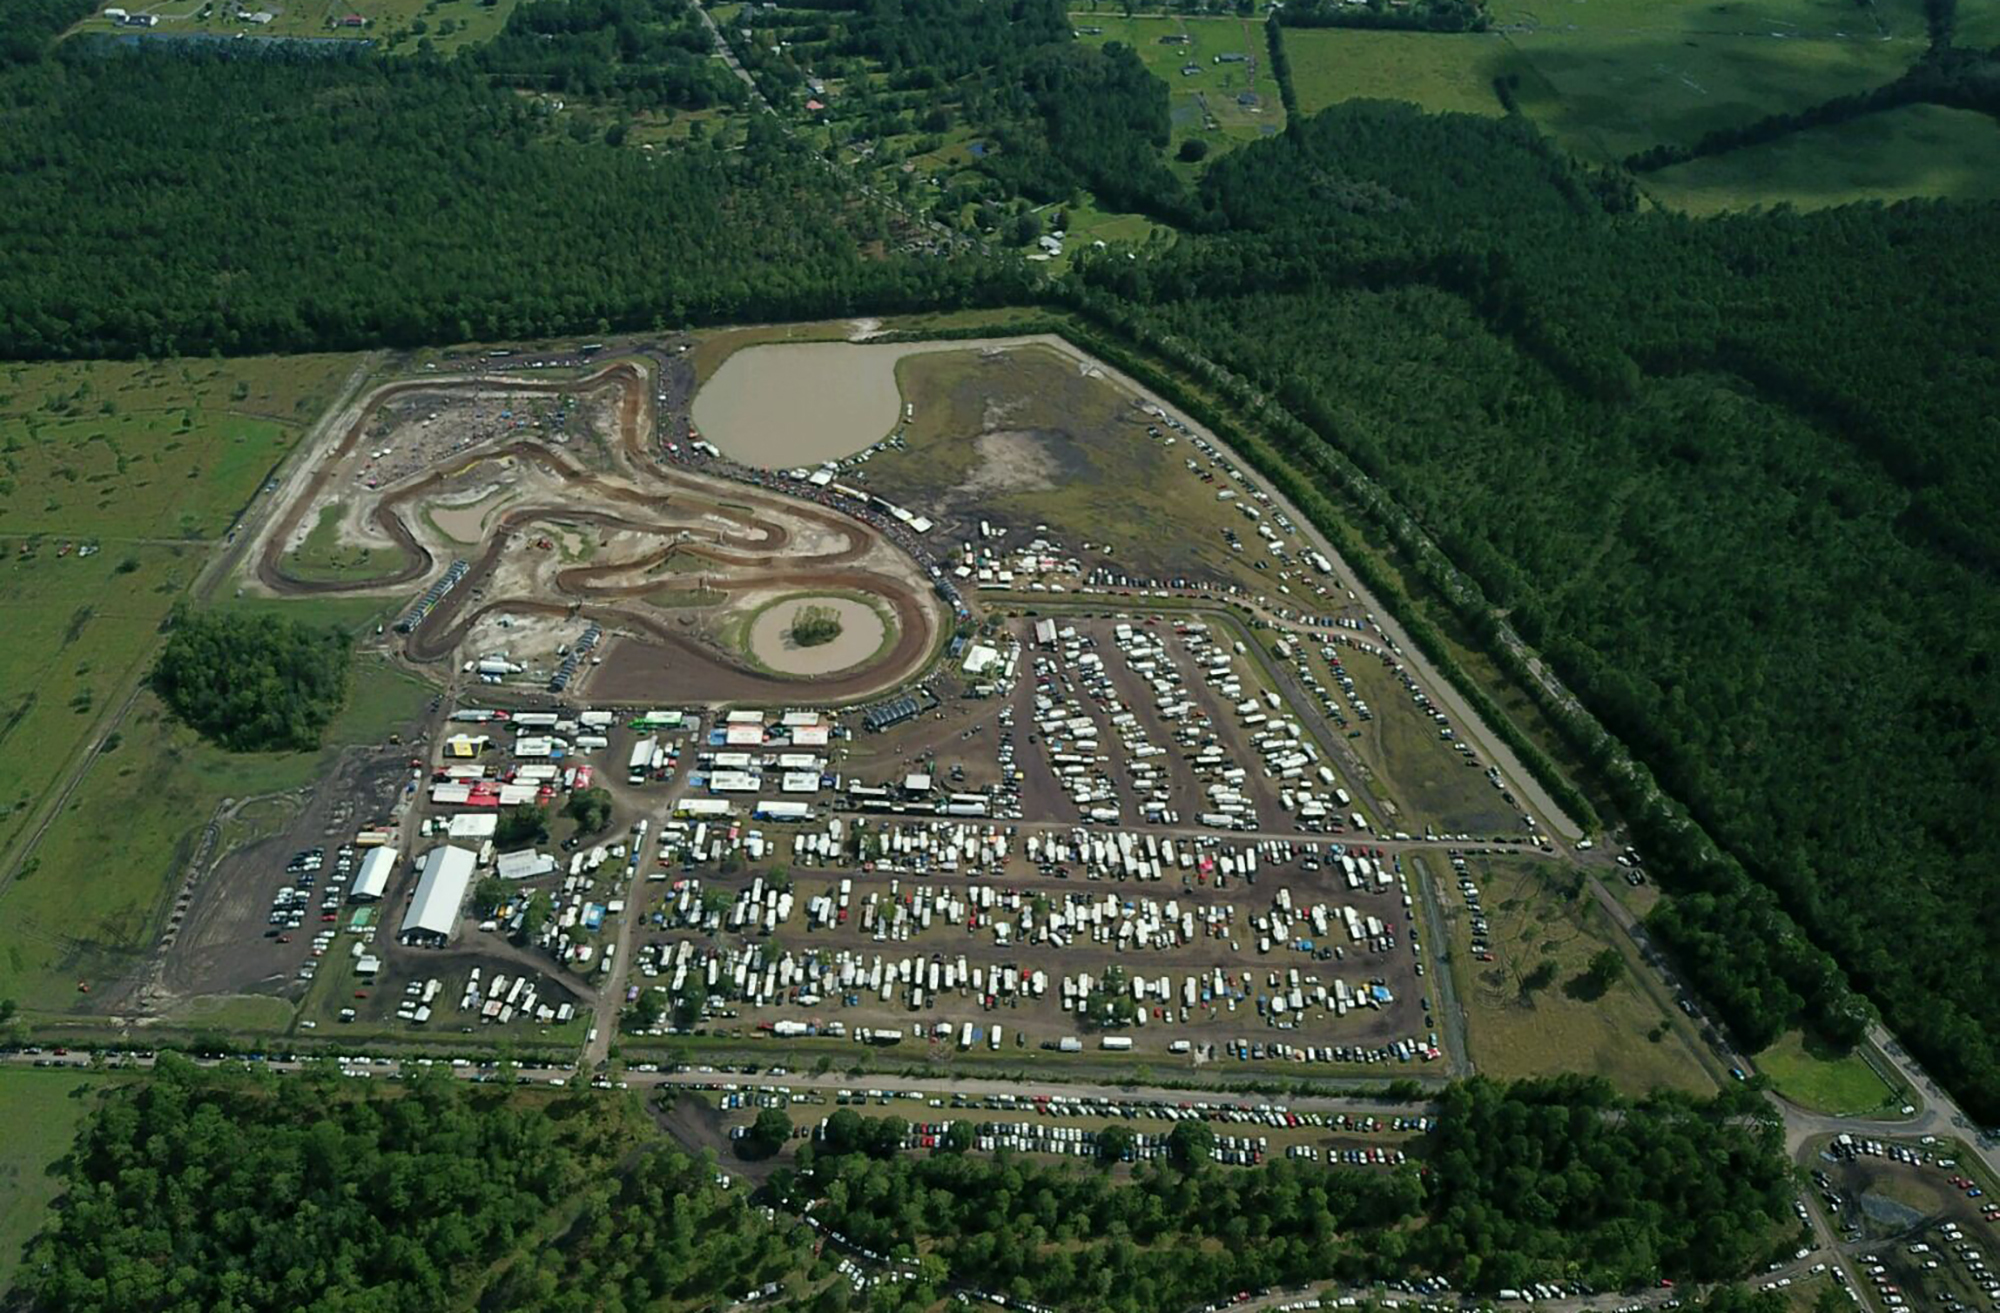 An aerial view of WW Motocross on 145 acres at the WW Ranch in the Whitehouse area of West Jacksonville during an event in 2017.